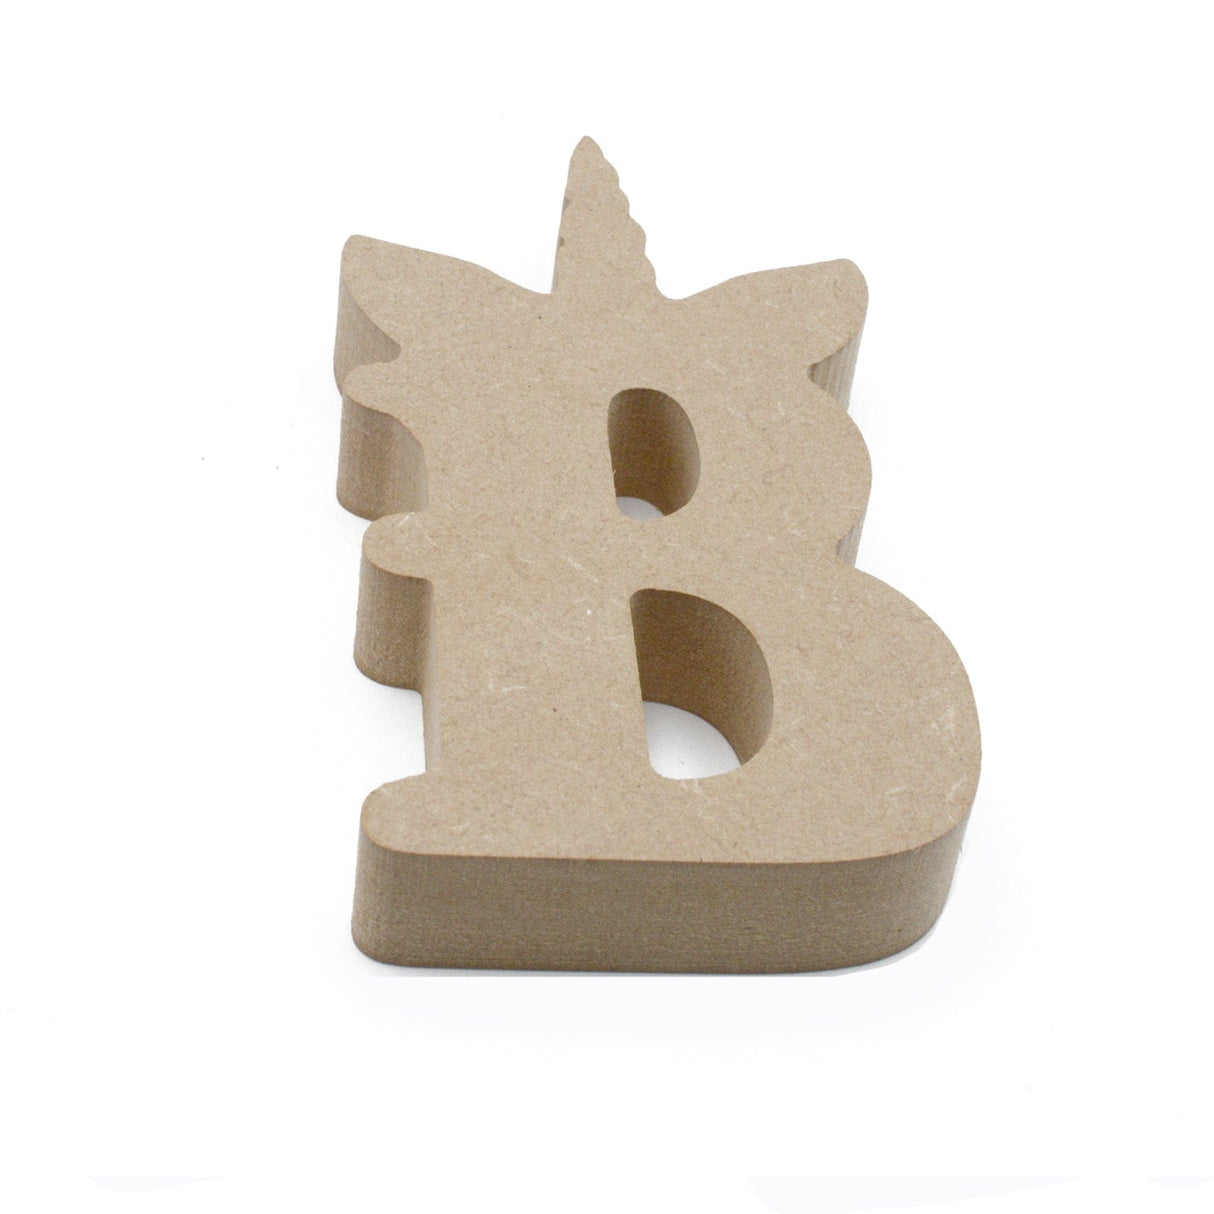 LaserworksUK Wooden Words & Letters Free Standing 18mm Personalised Unicorn Letters & Numbers